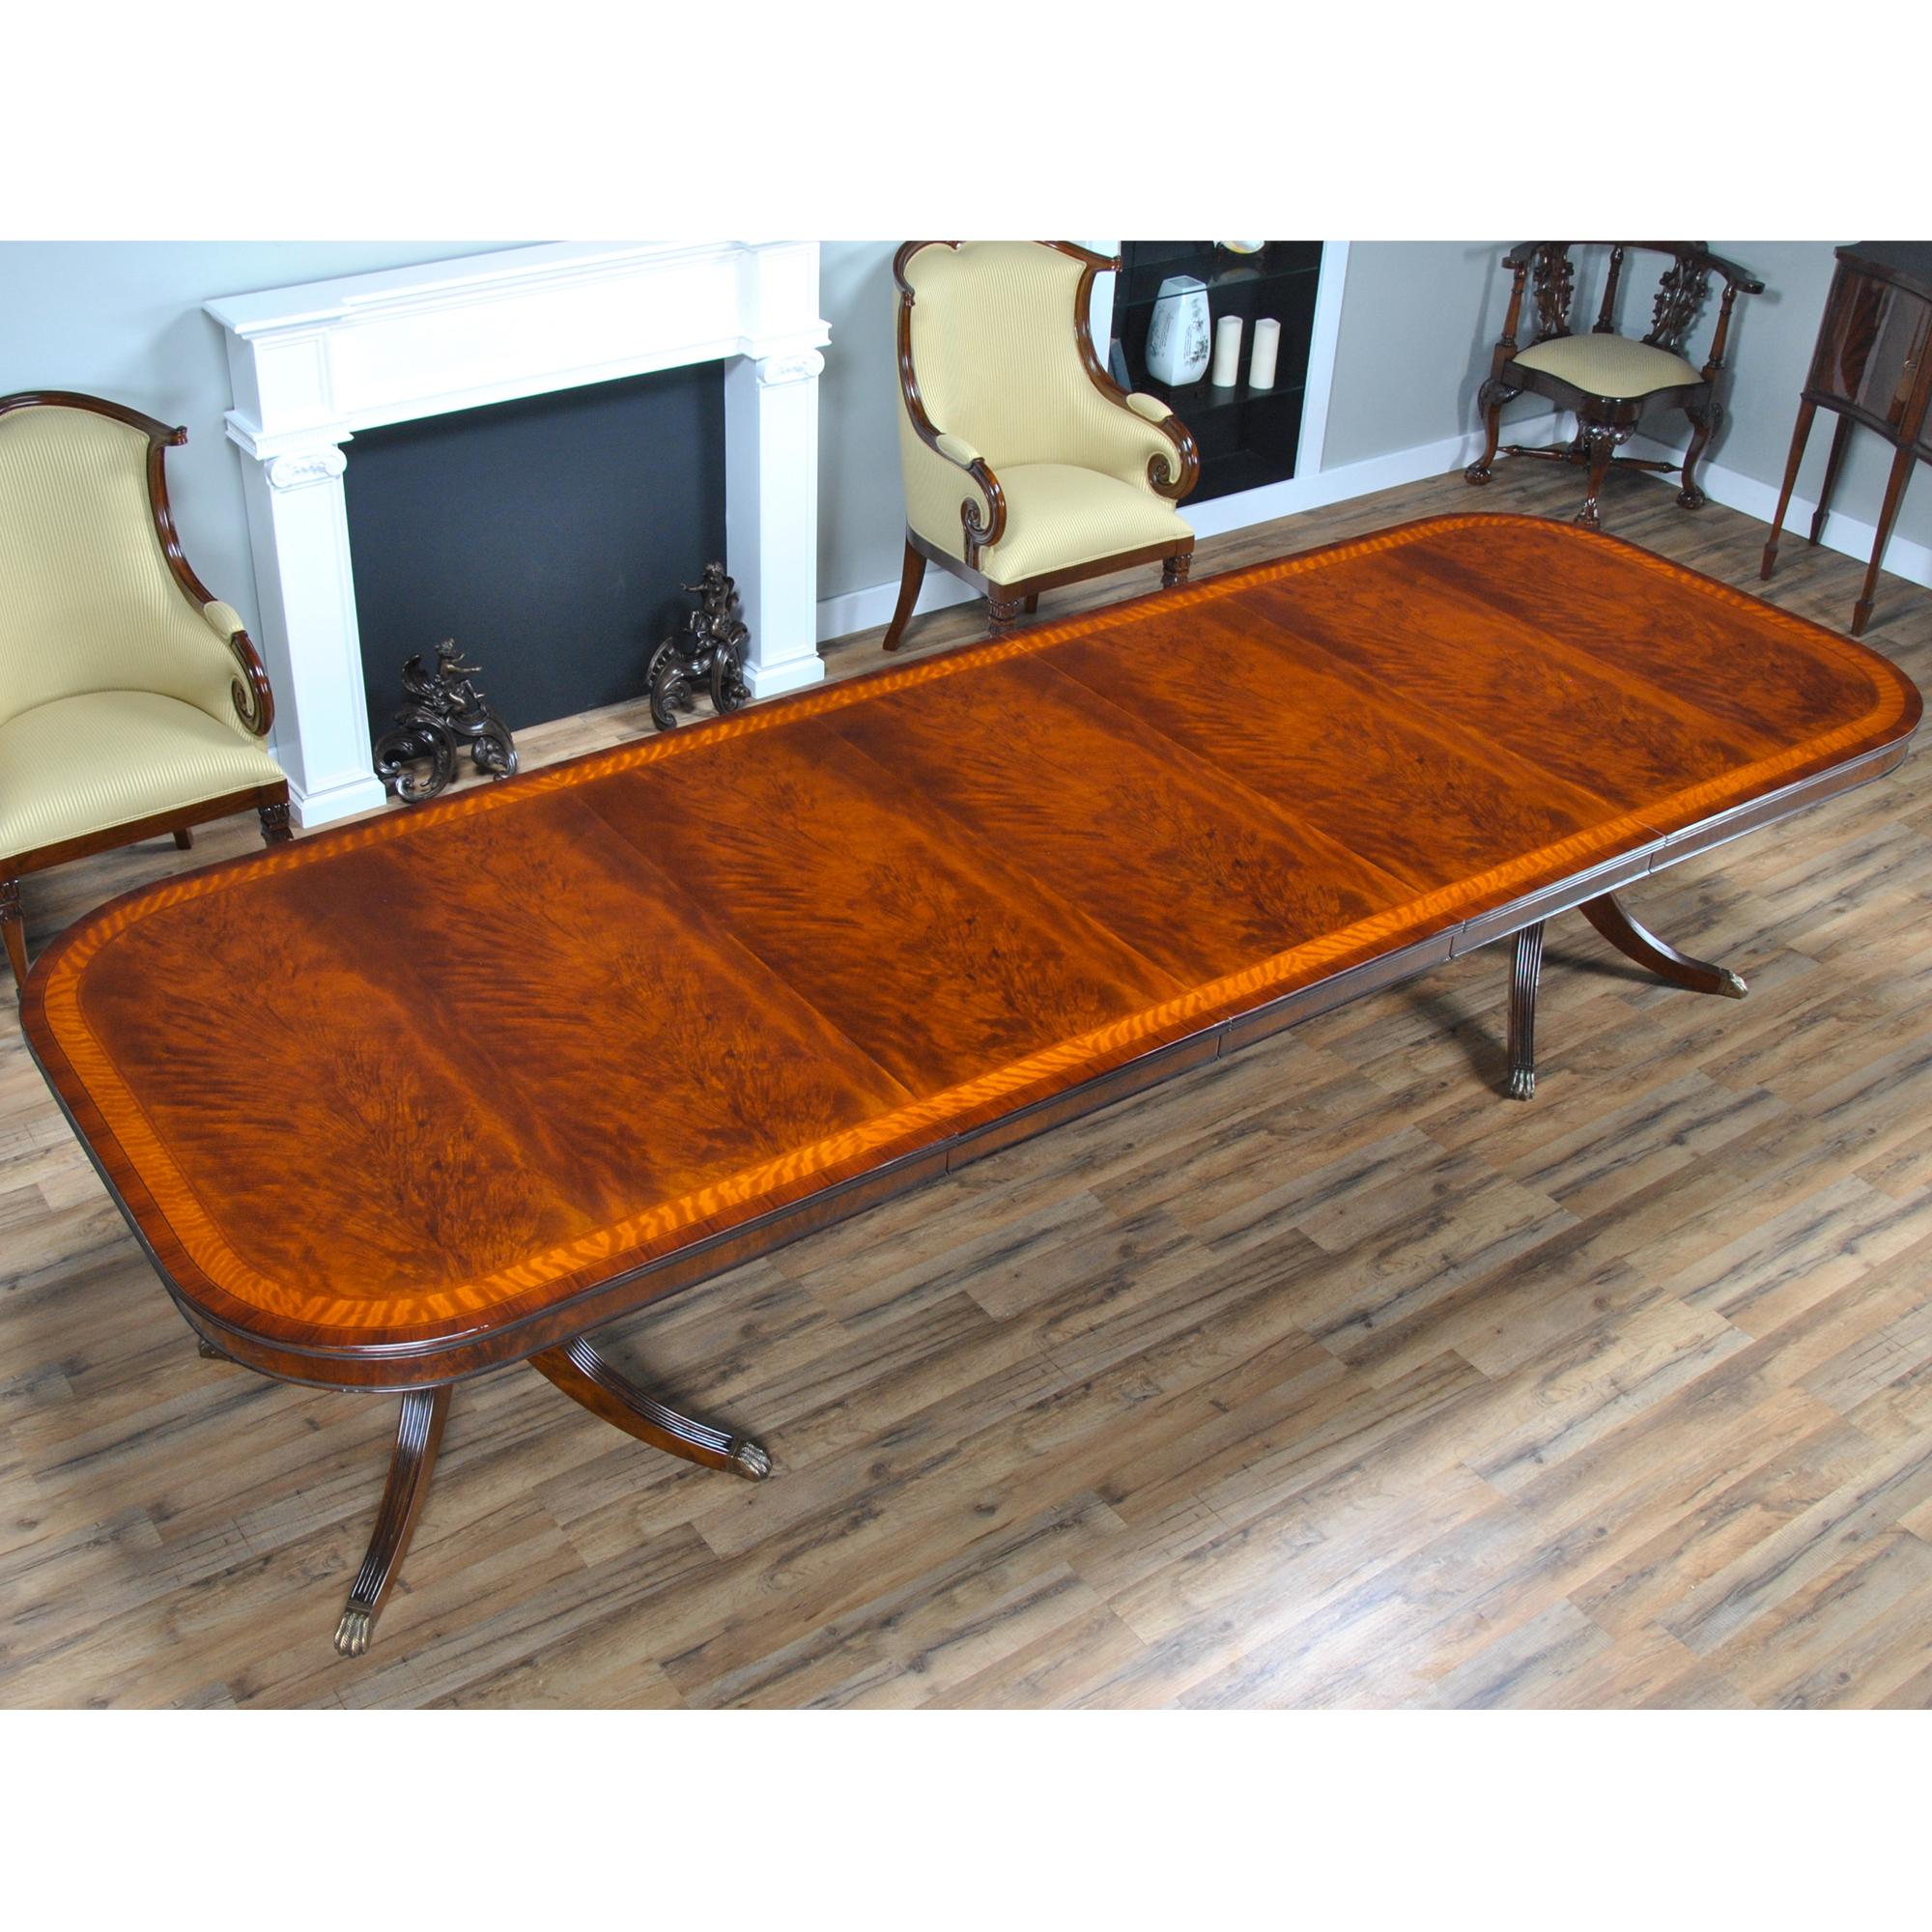 The Banded Mahogany Dining Table has a lot of great features that combine to make it a show stopper. A reeded solid mahogany edge surrounds the table top and then flows into numerous bandings consisting of rosewood, satinwood, ebony and sapele